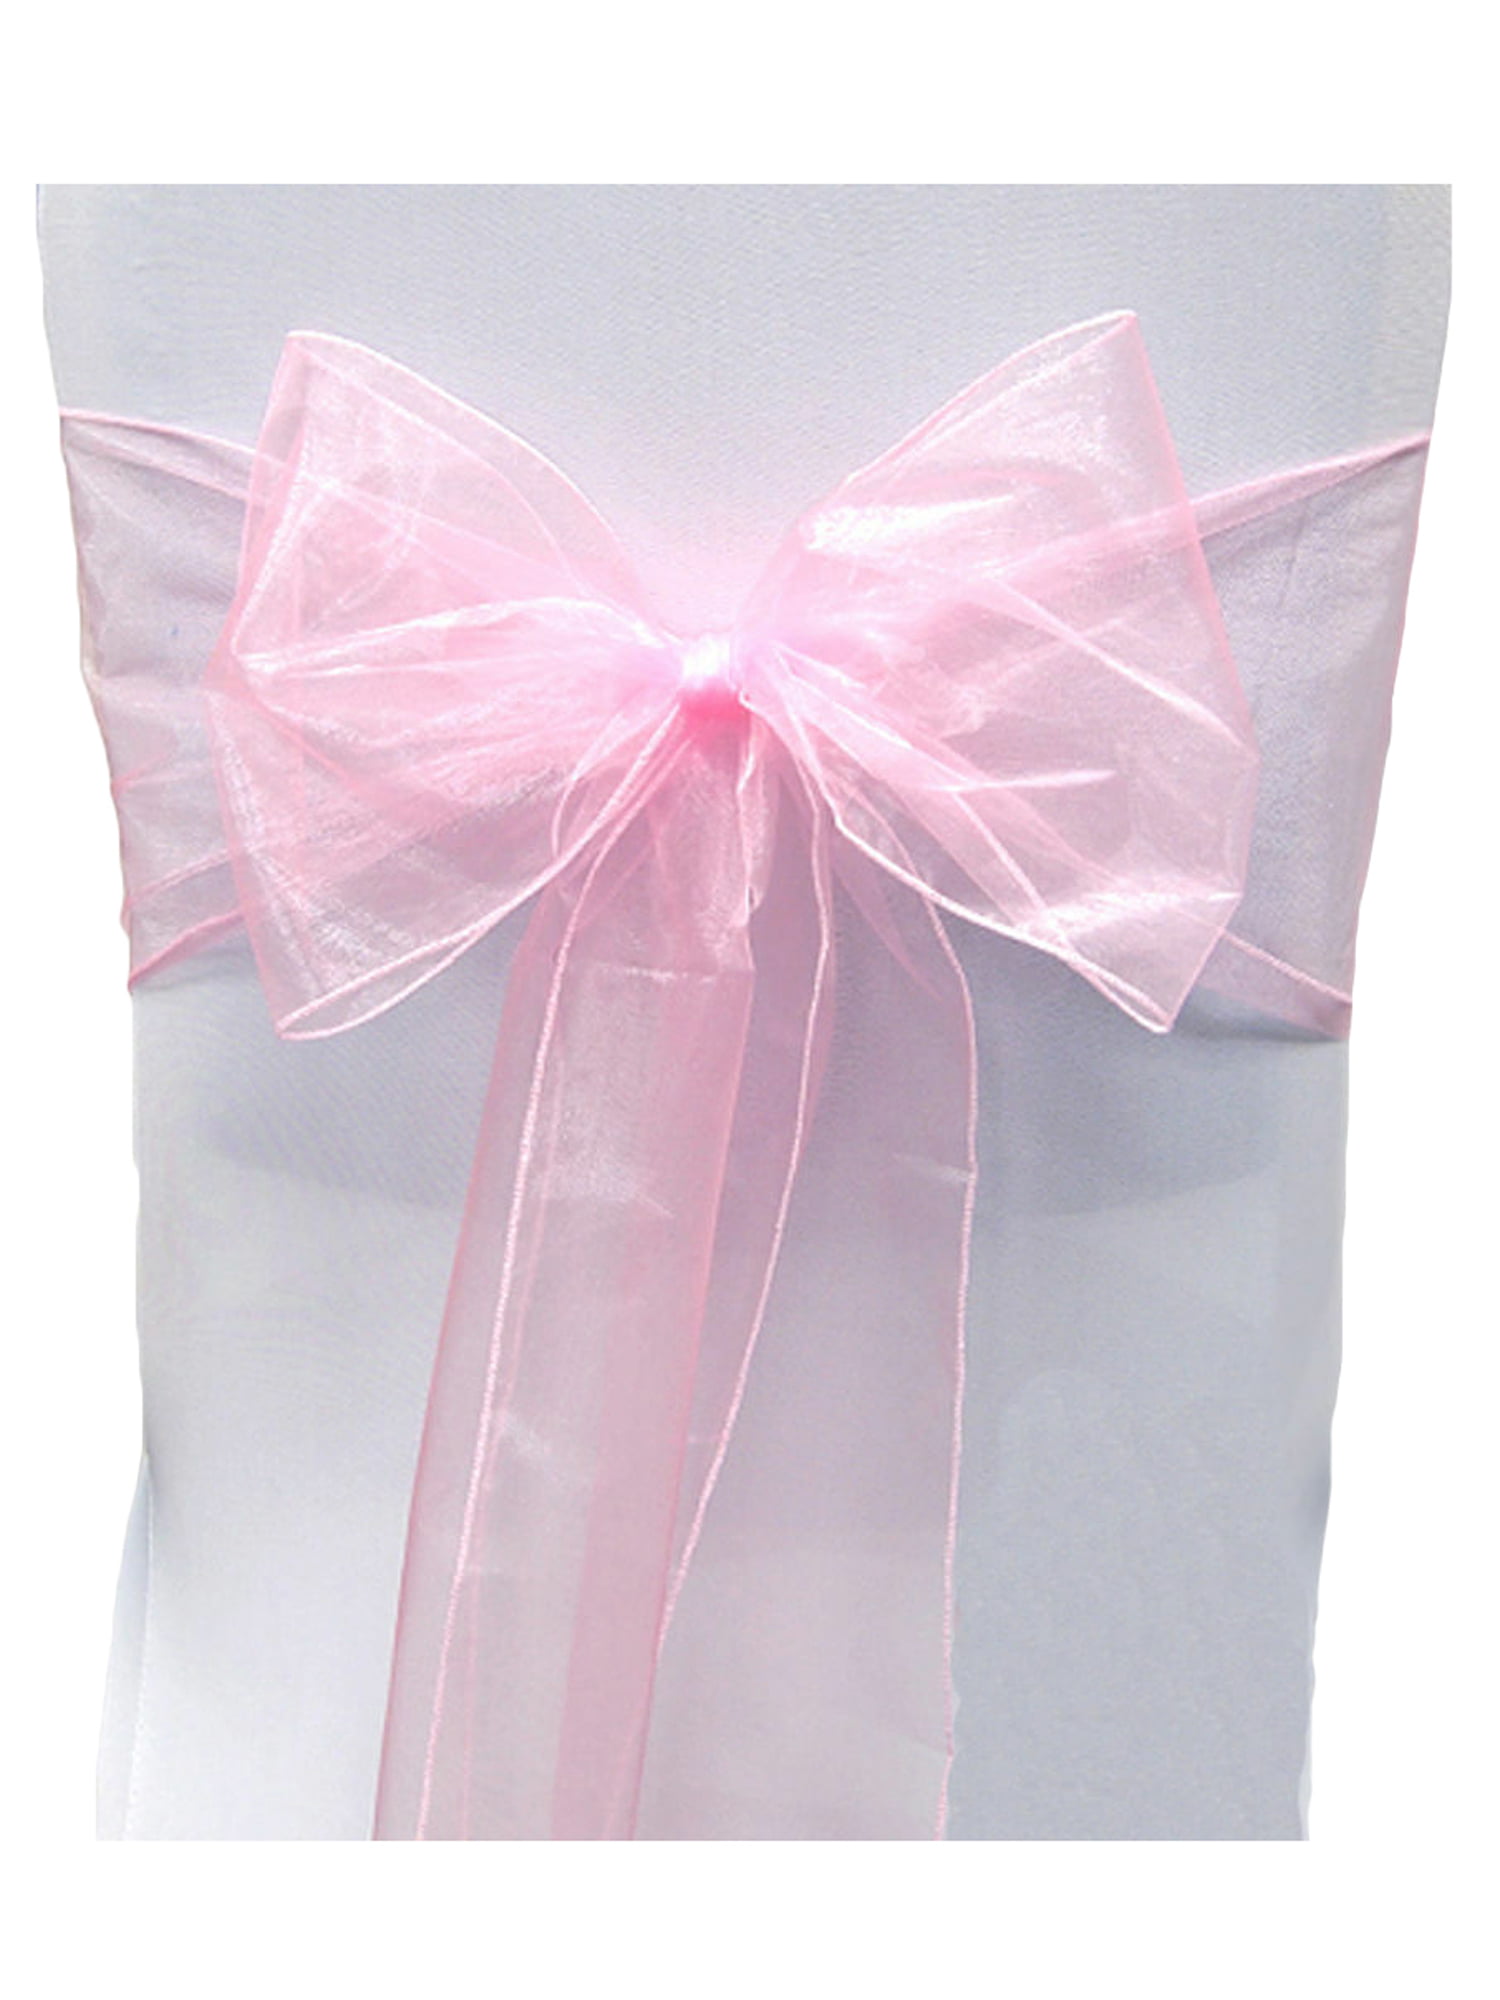 Pack of 10 Organza Hood sashes Bow wedding banquet chair cover wrap FREE SHIP 